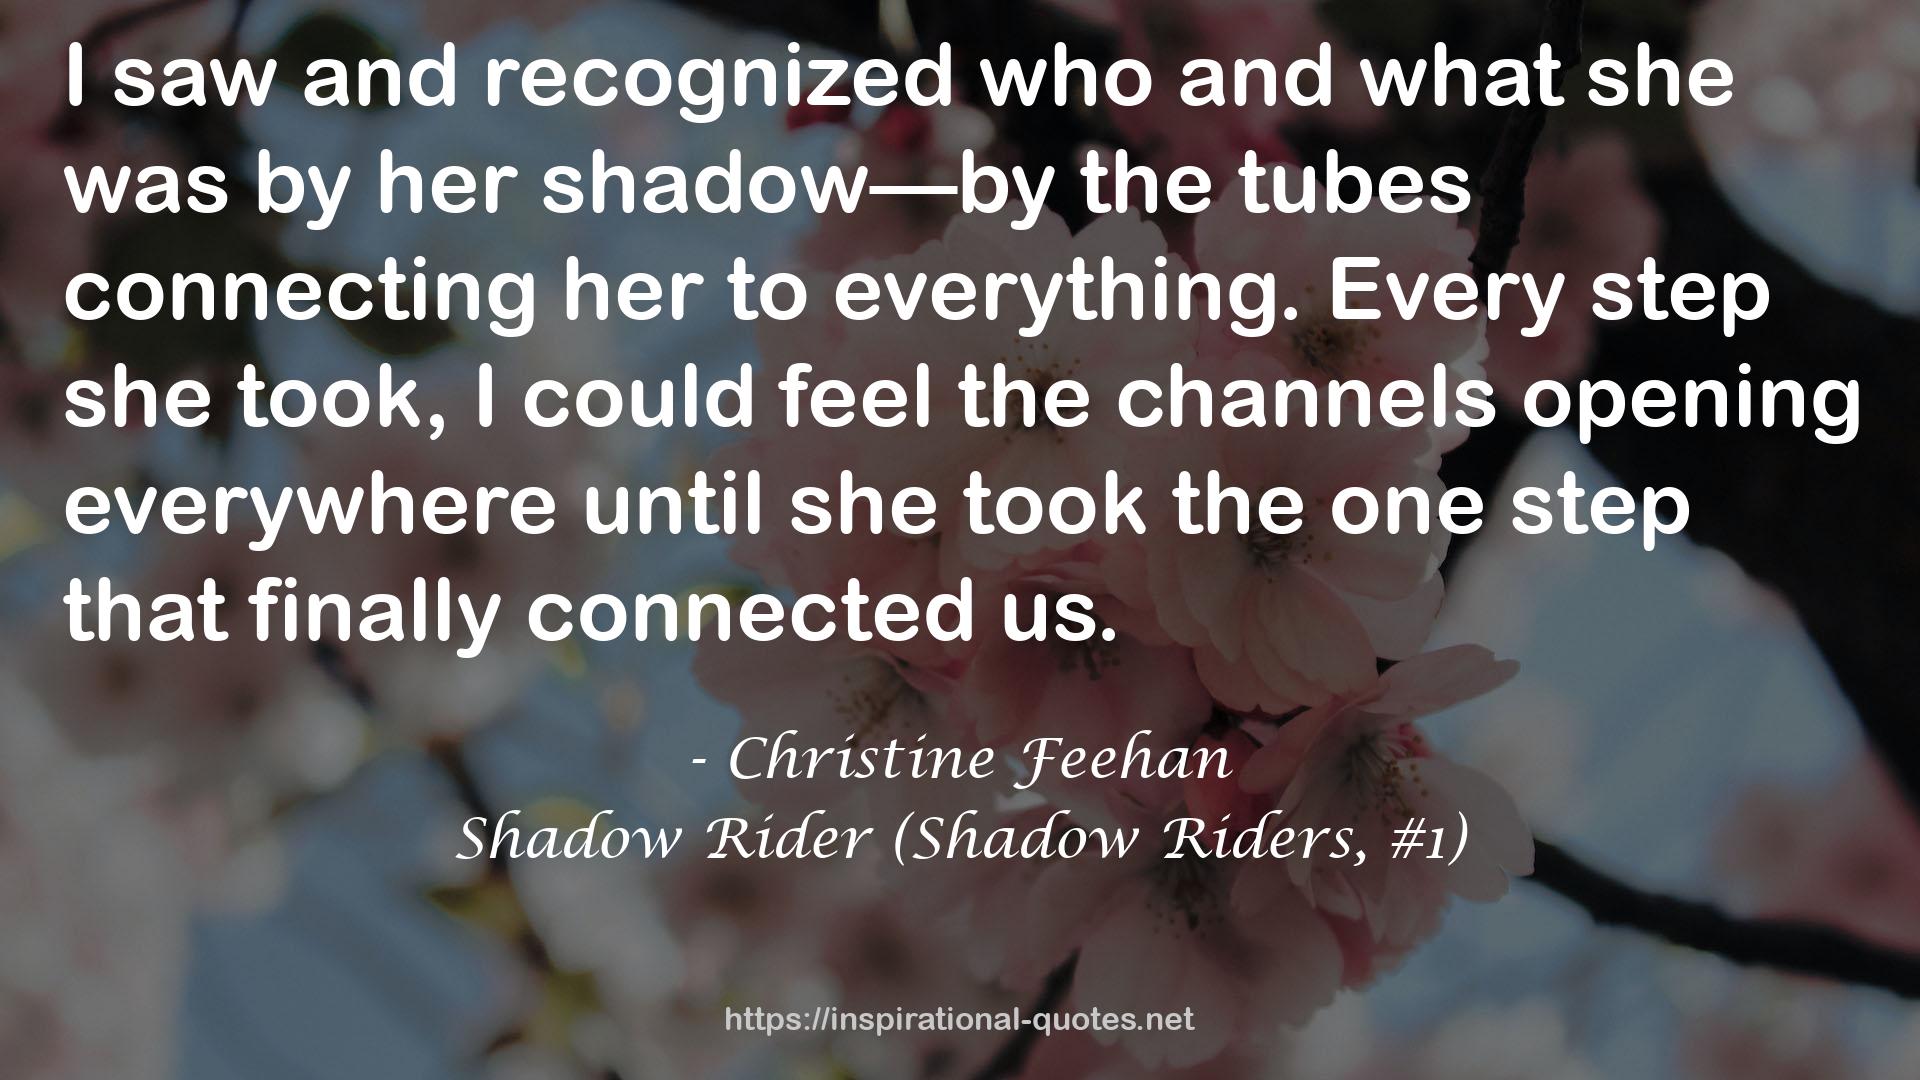 Shadow Rider (Shadow Riders, #1) QUOTES